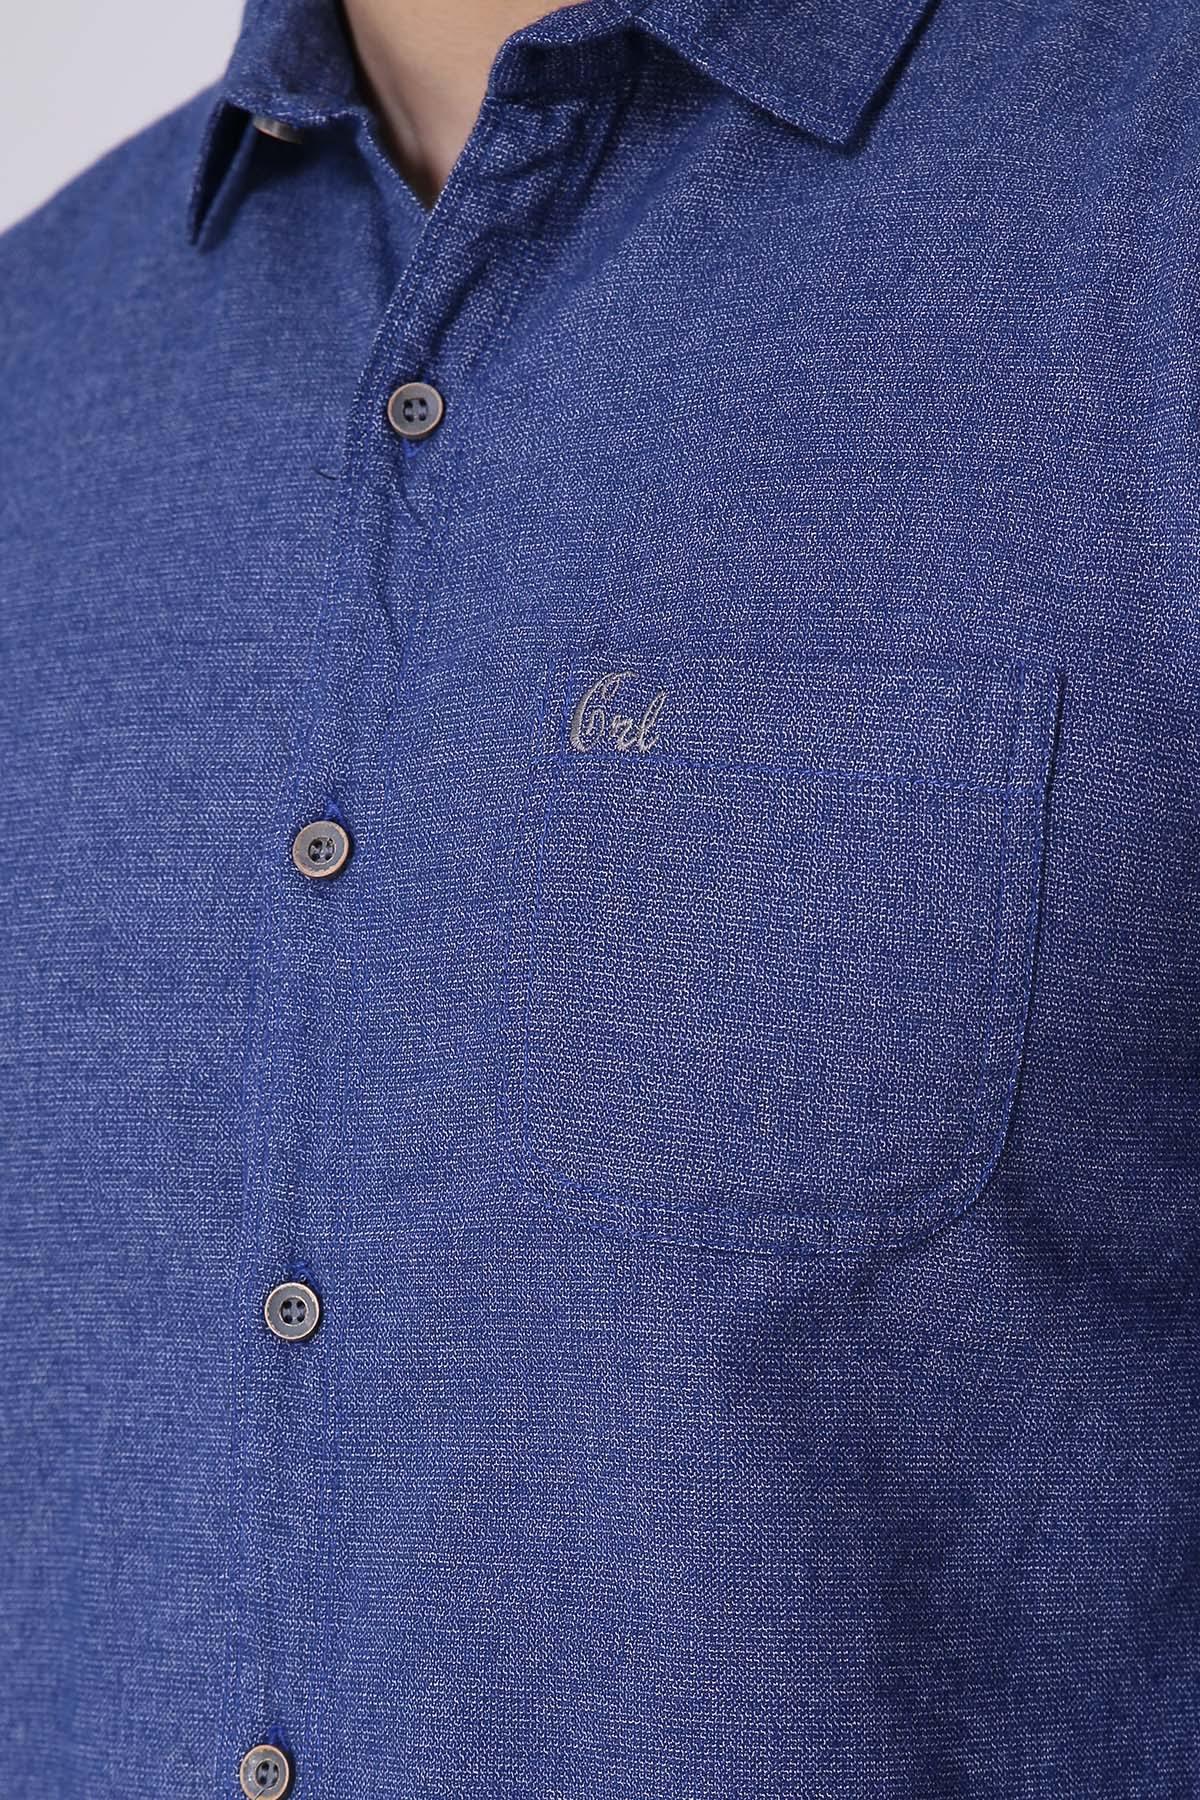 CASUAL SHIRT FULL SLEEVE SLIM FIT BLUE at Charcoal Clothing